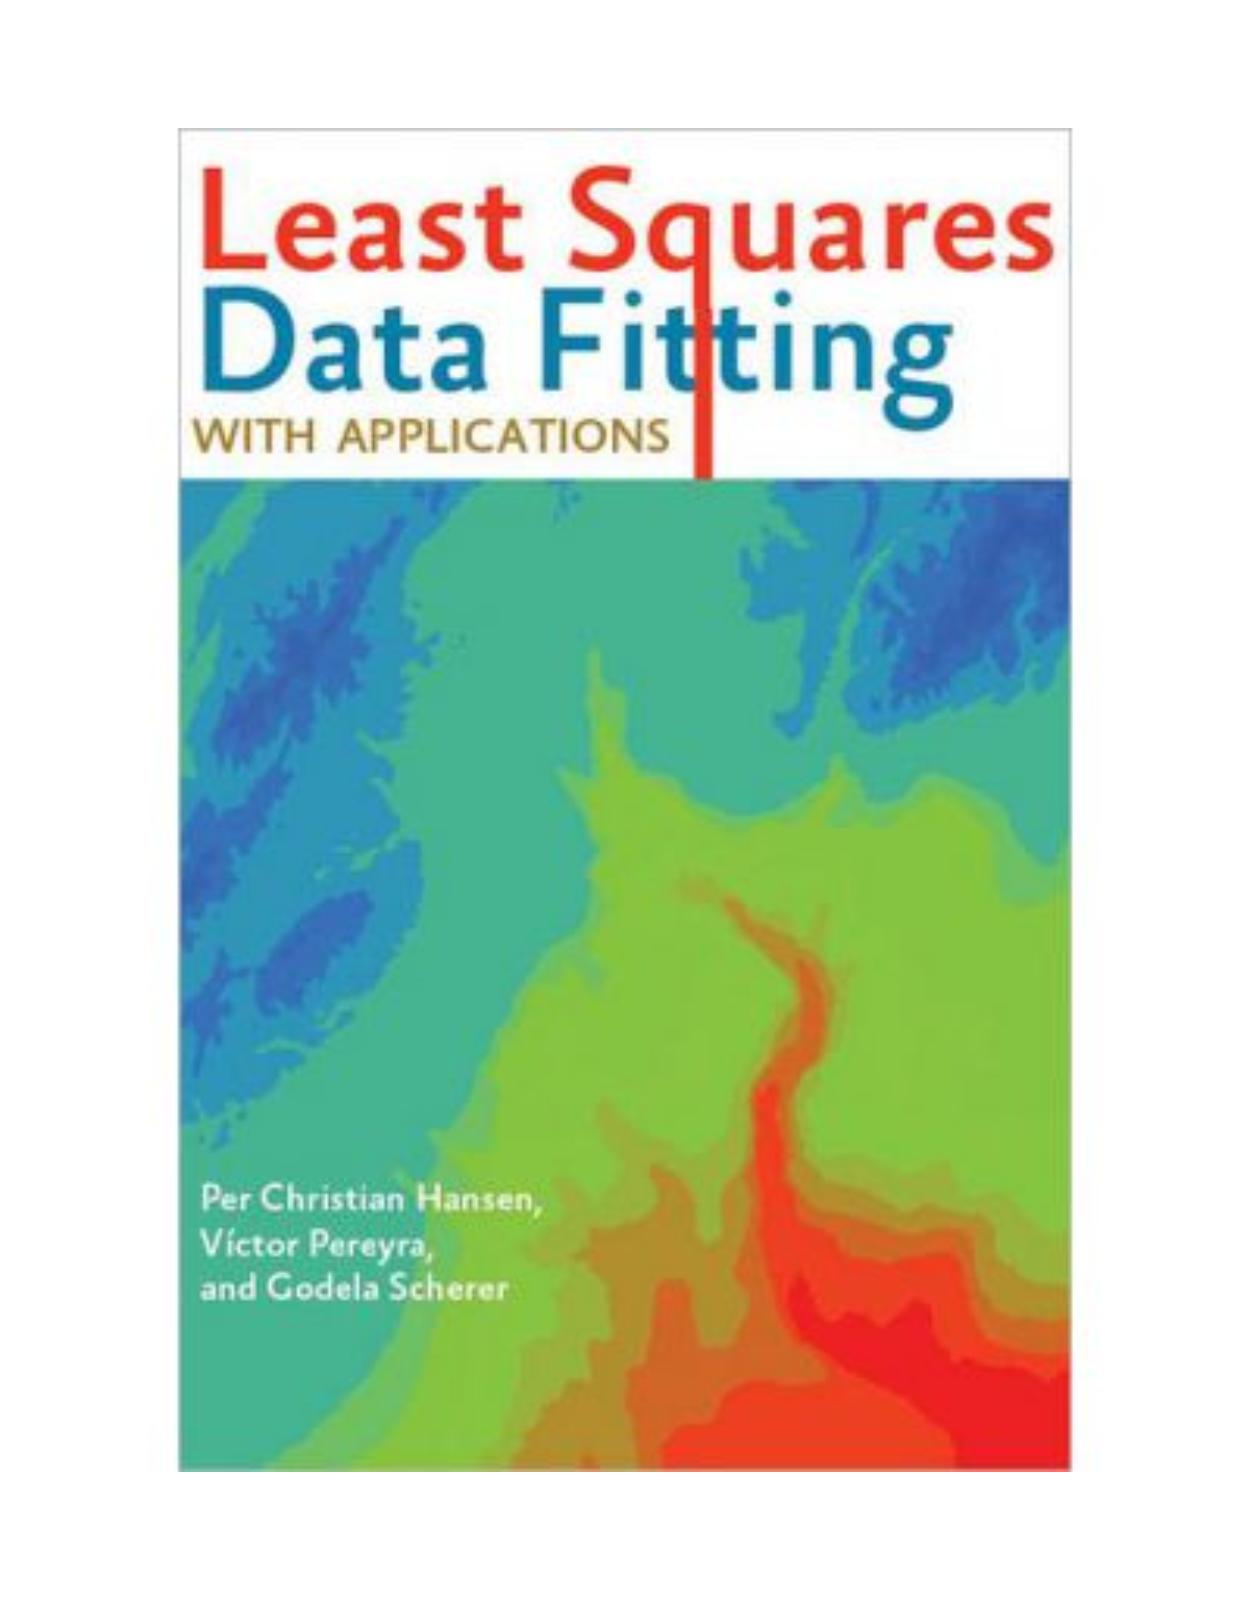 Least Squares Data Fitting with Applications.